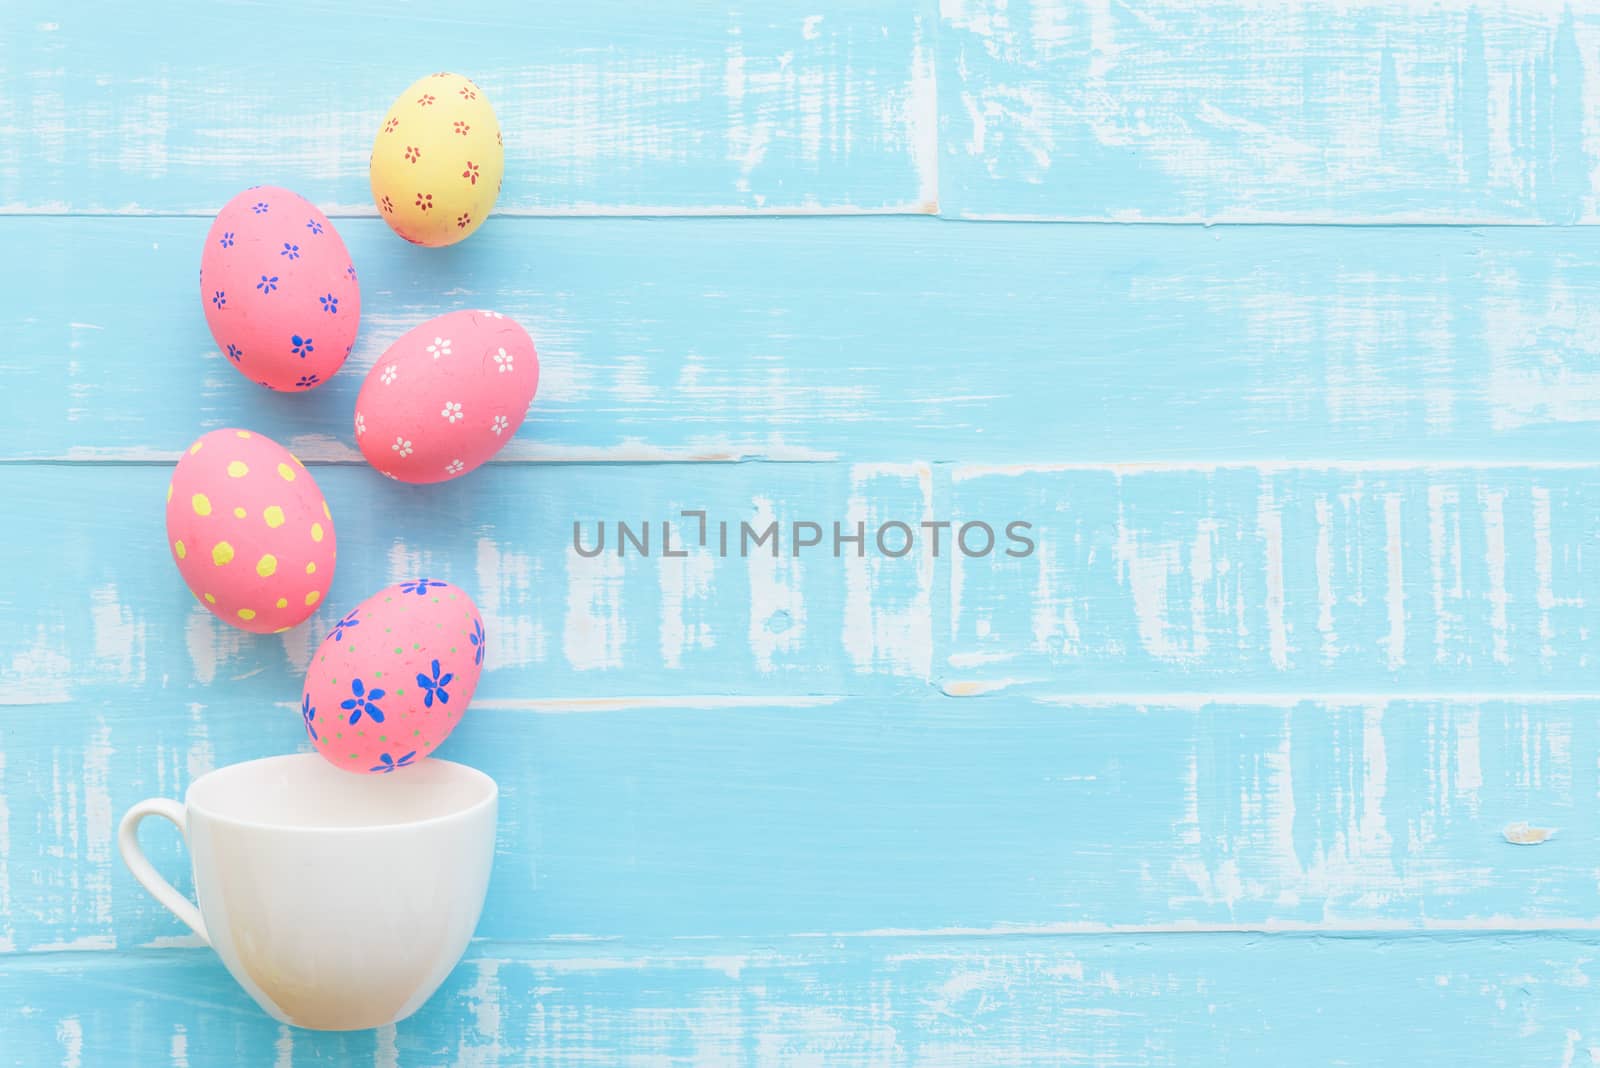 Happy easter! Row colorful Easter eggs spread out from white cup on bright green wooden background.